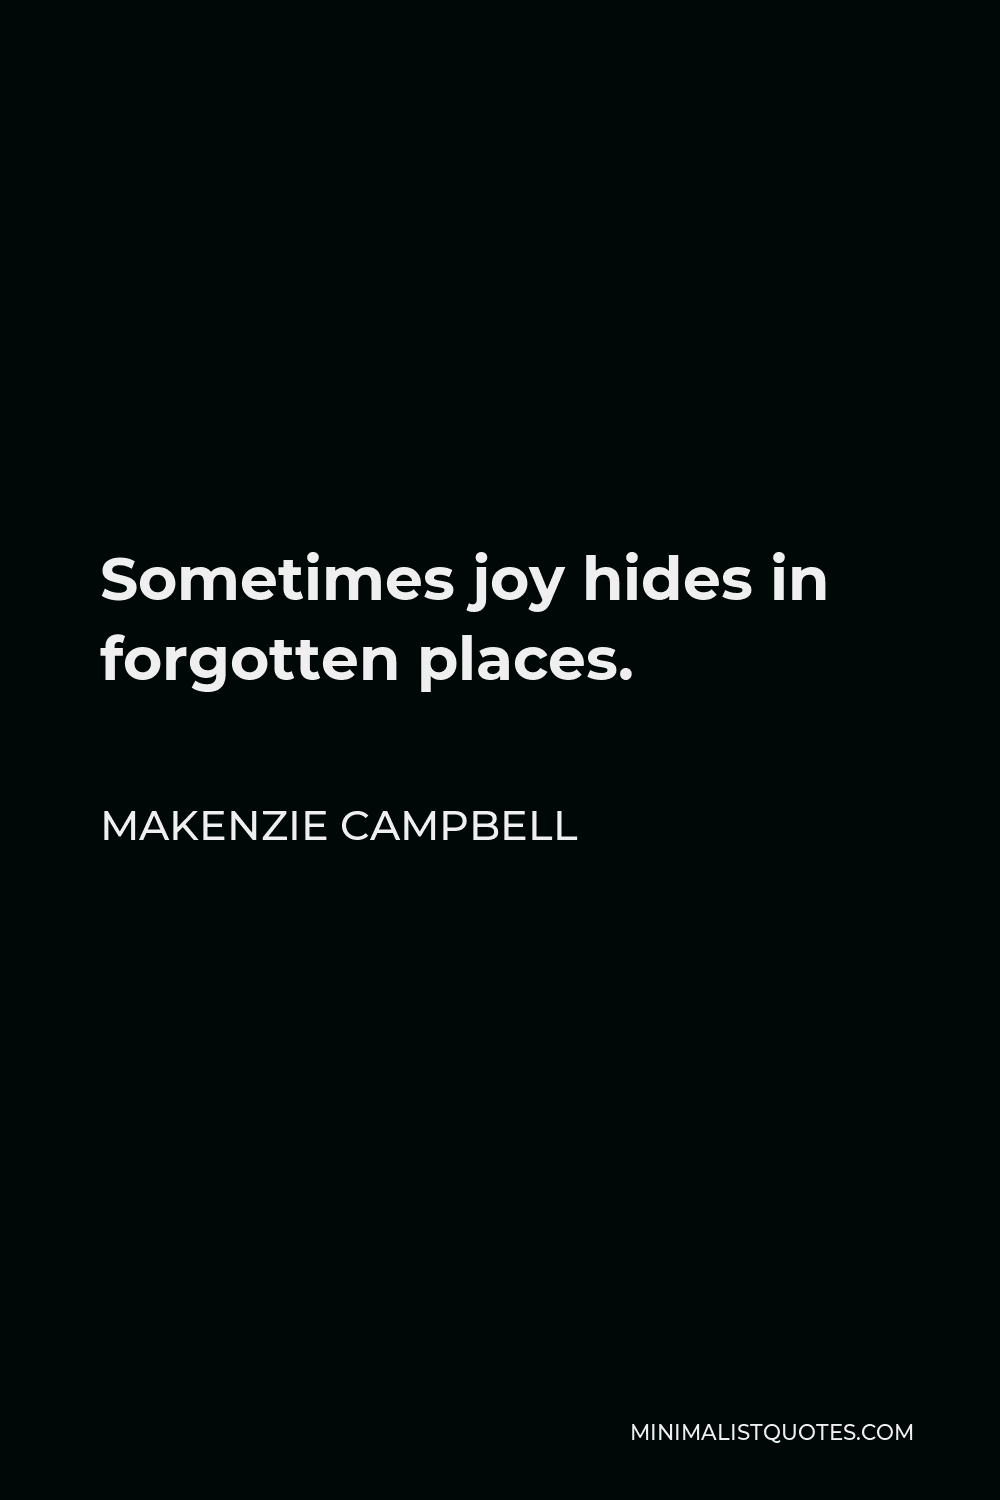 Makenzie Campbell Quote - Sometimes joy hides in forgotten places.